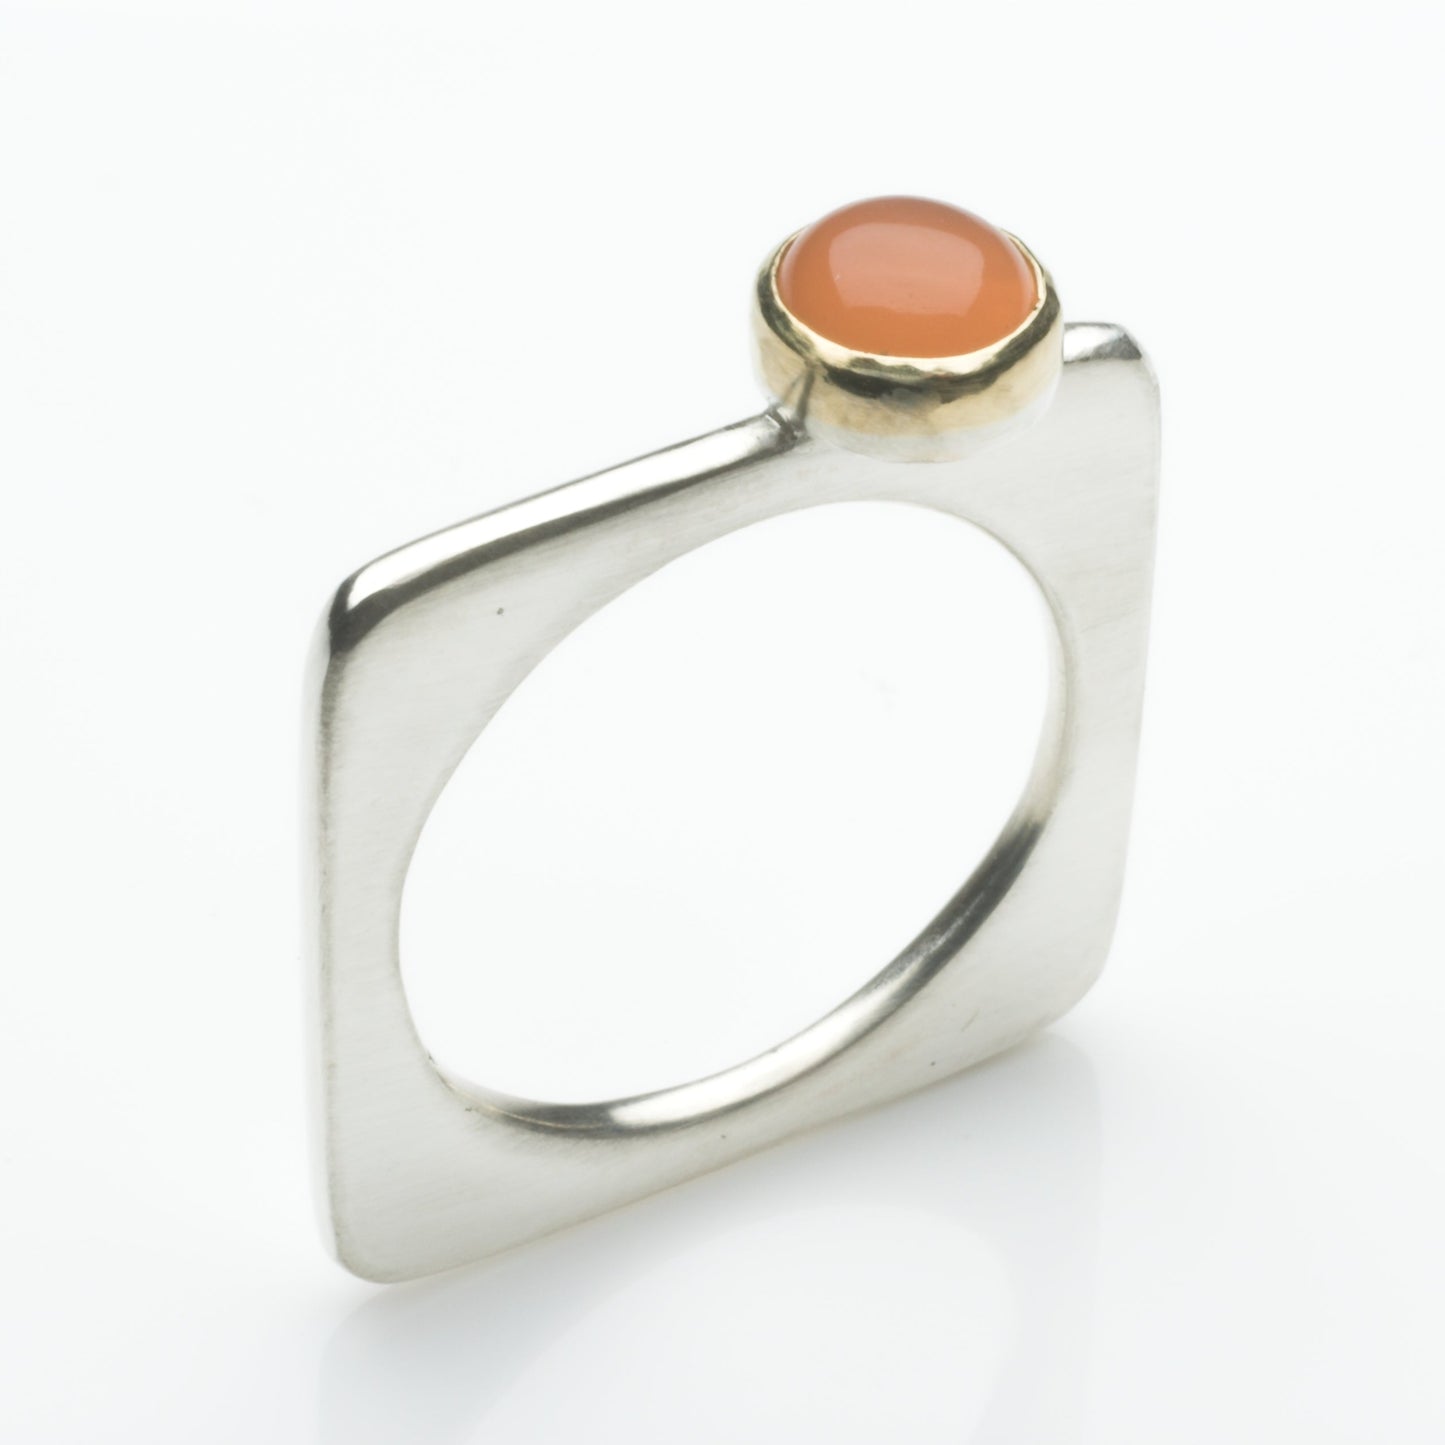 Square silver ring with 6mm peach moonstone